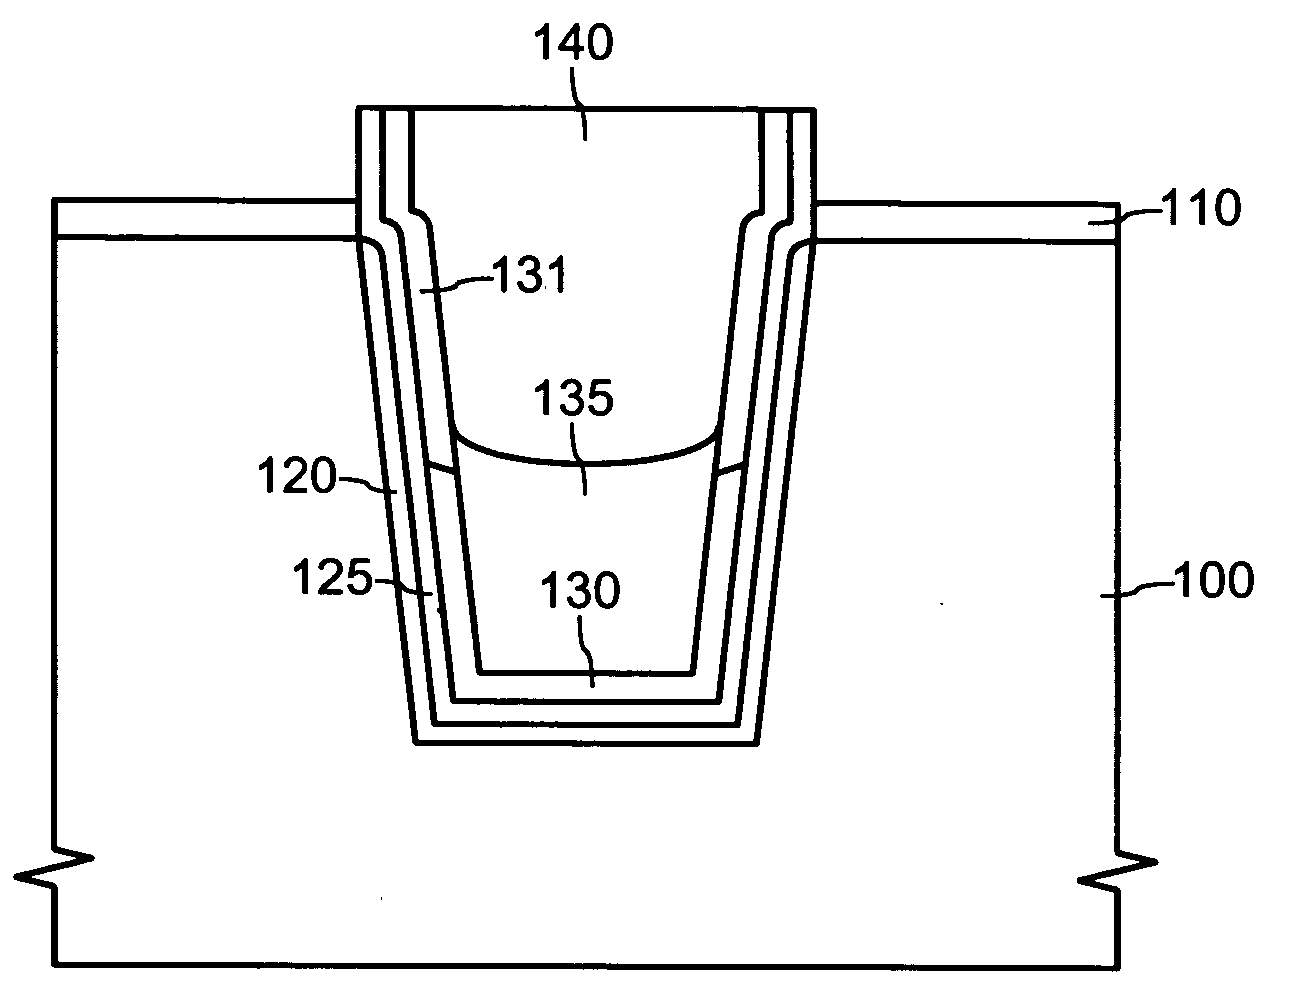 Shallow trench isolation structure with converted liner layer